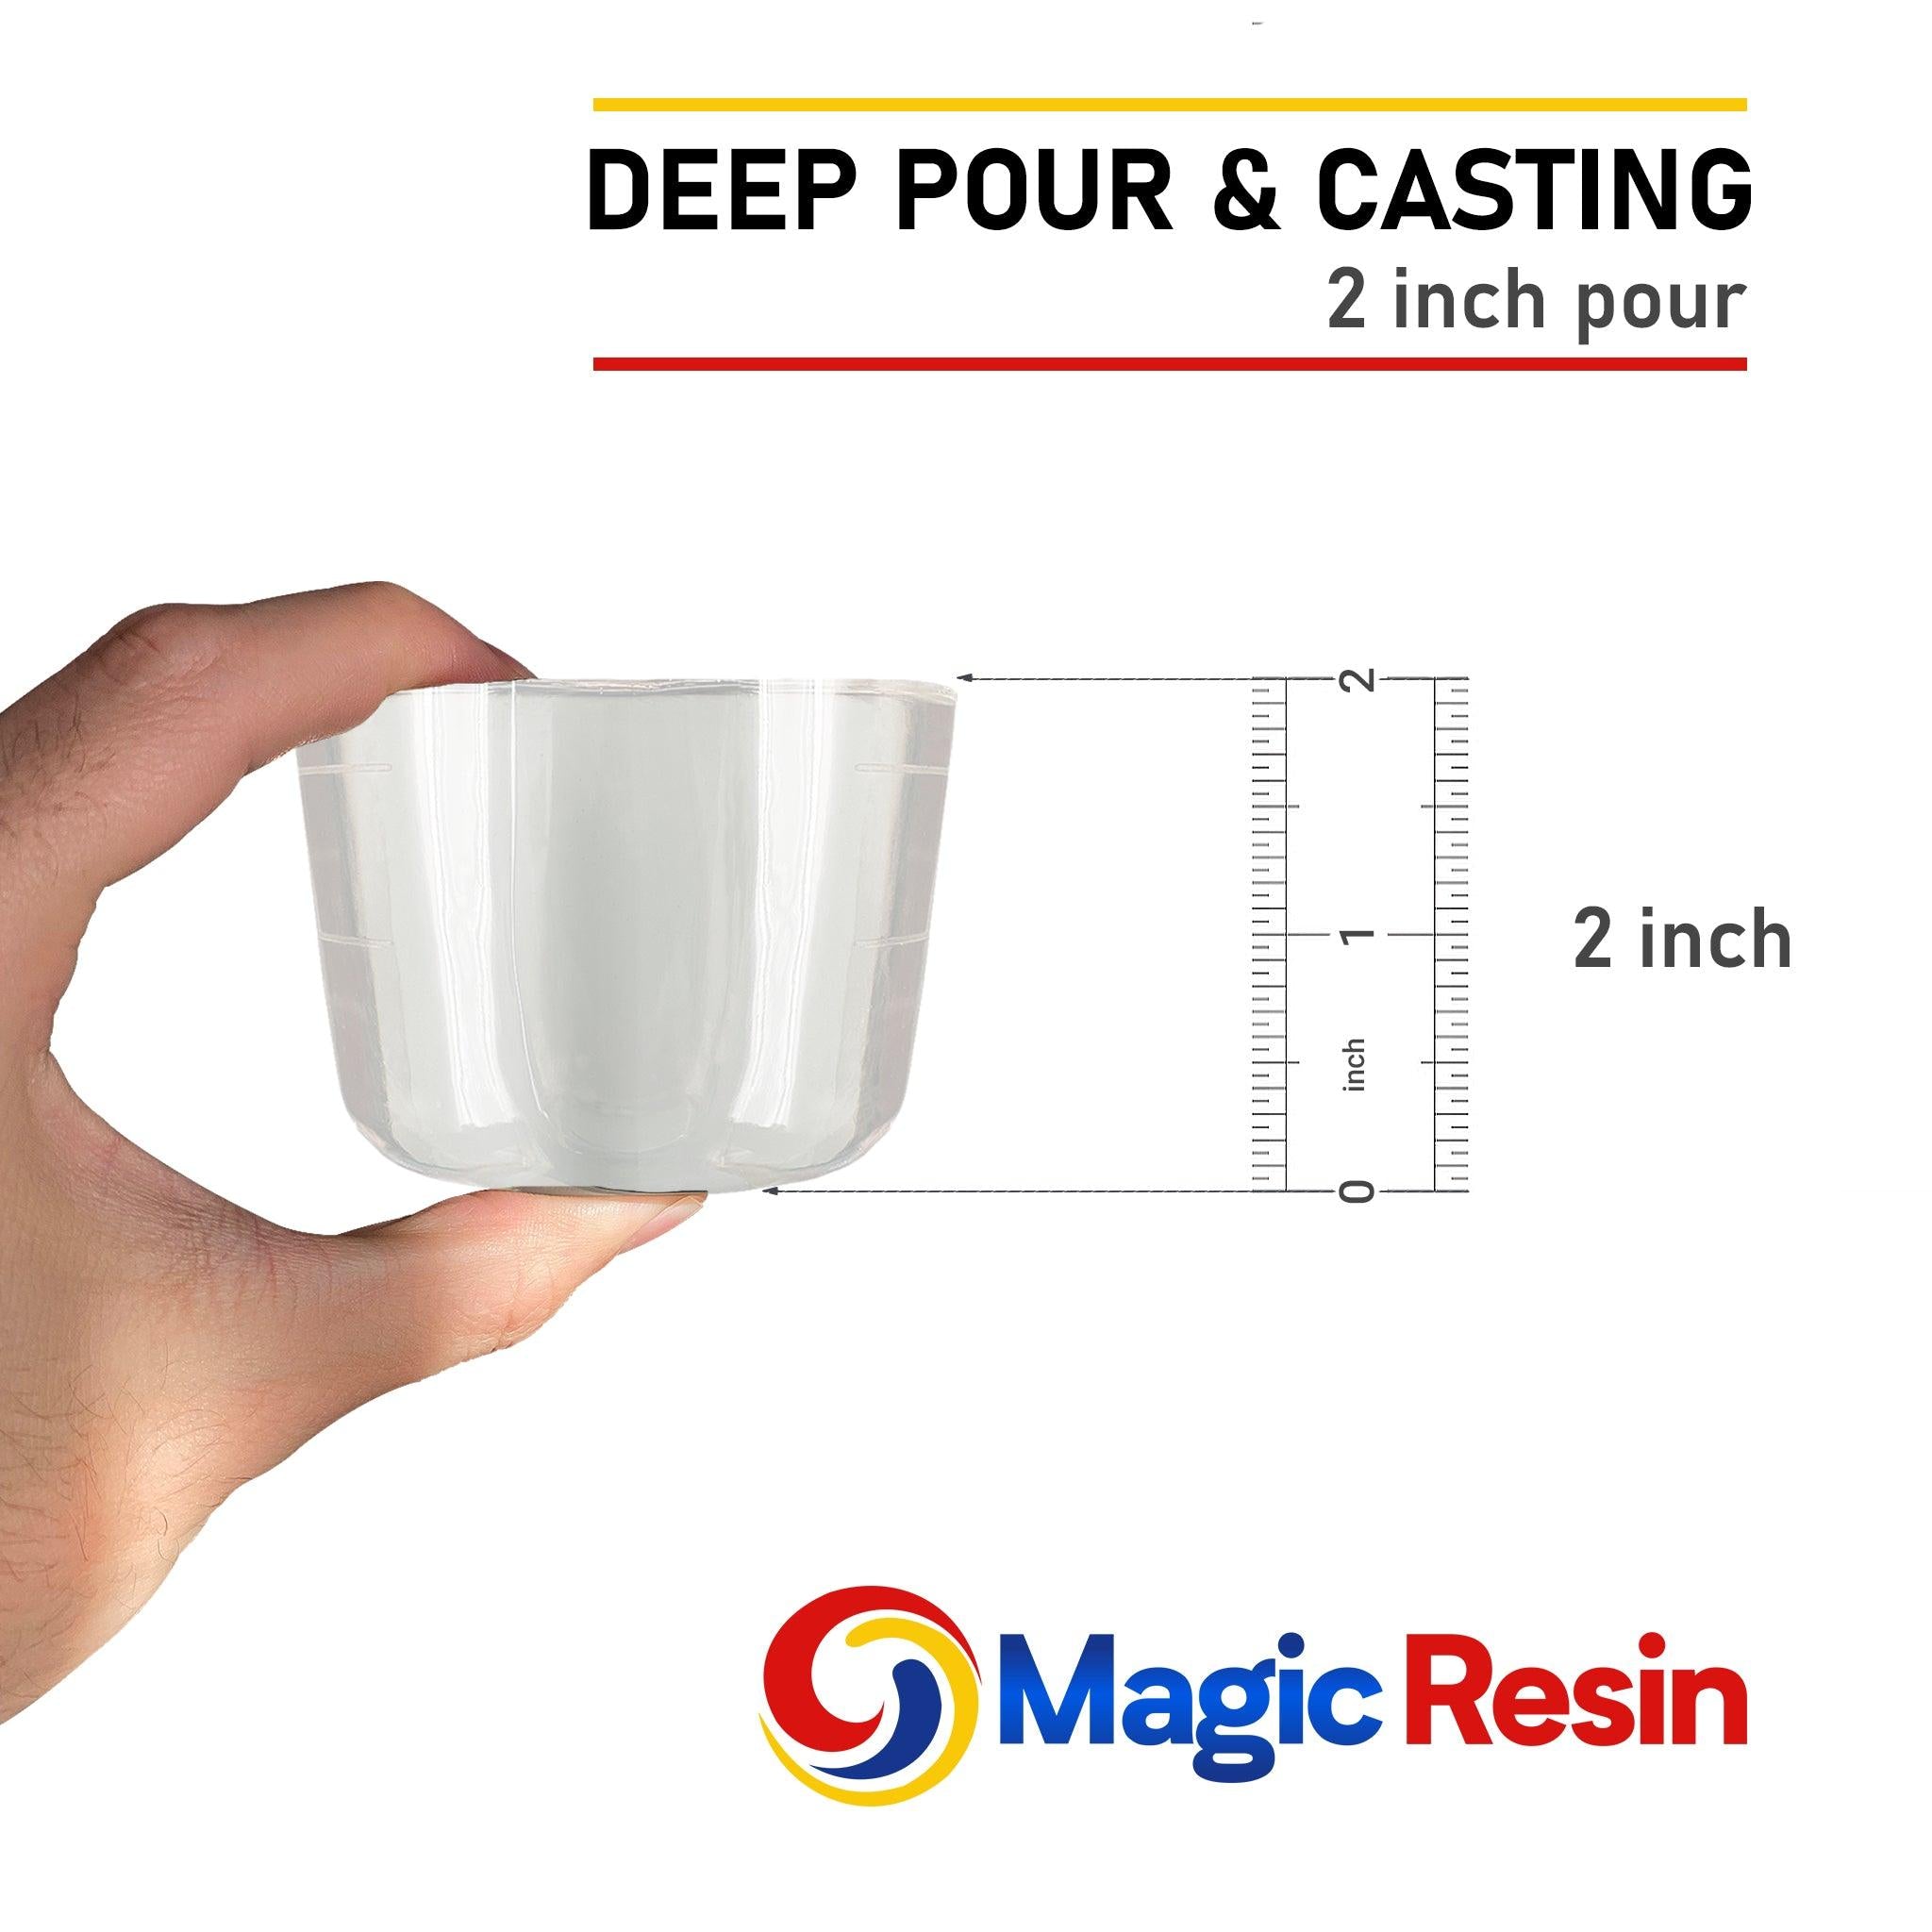 Deep Pour Resin for lakes, streams and rivers